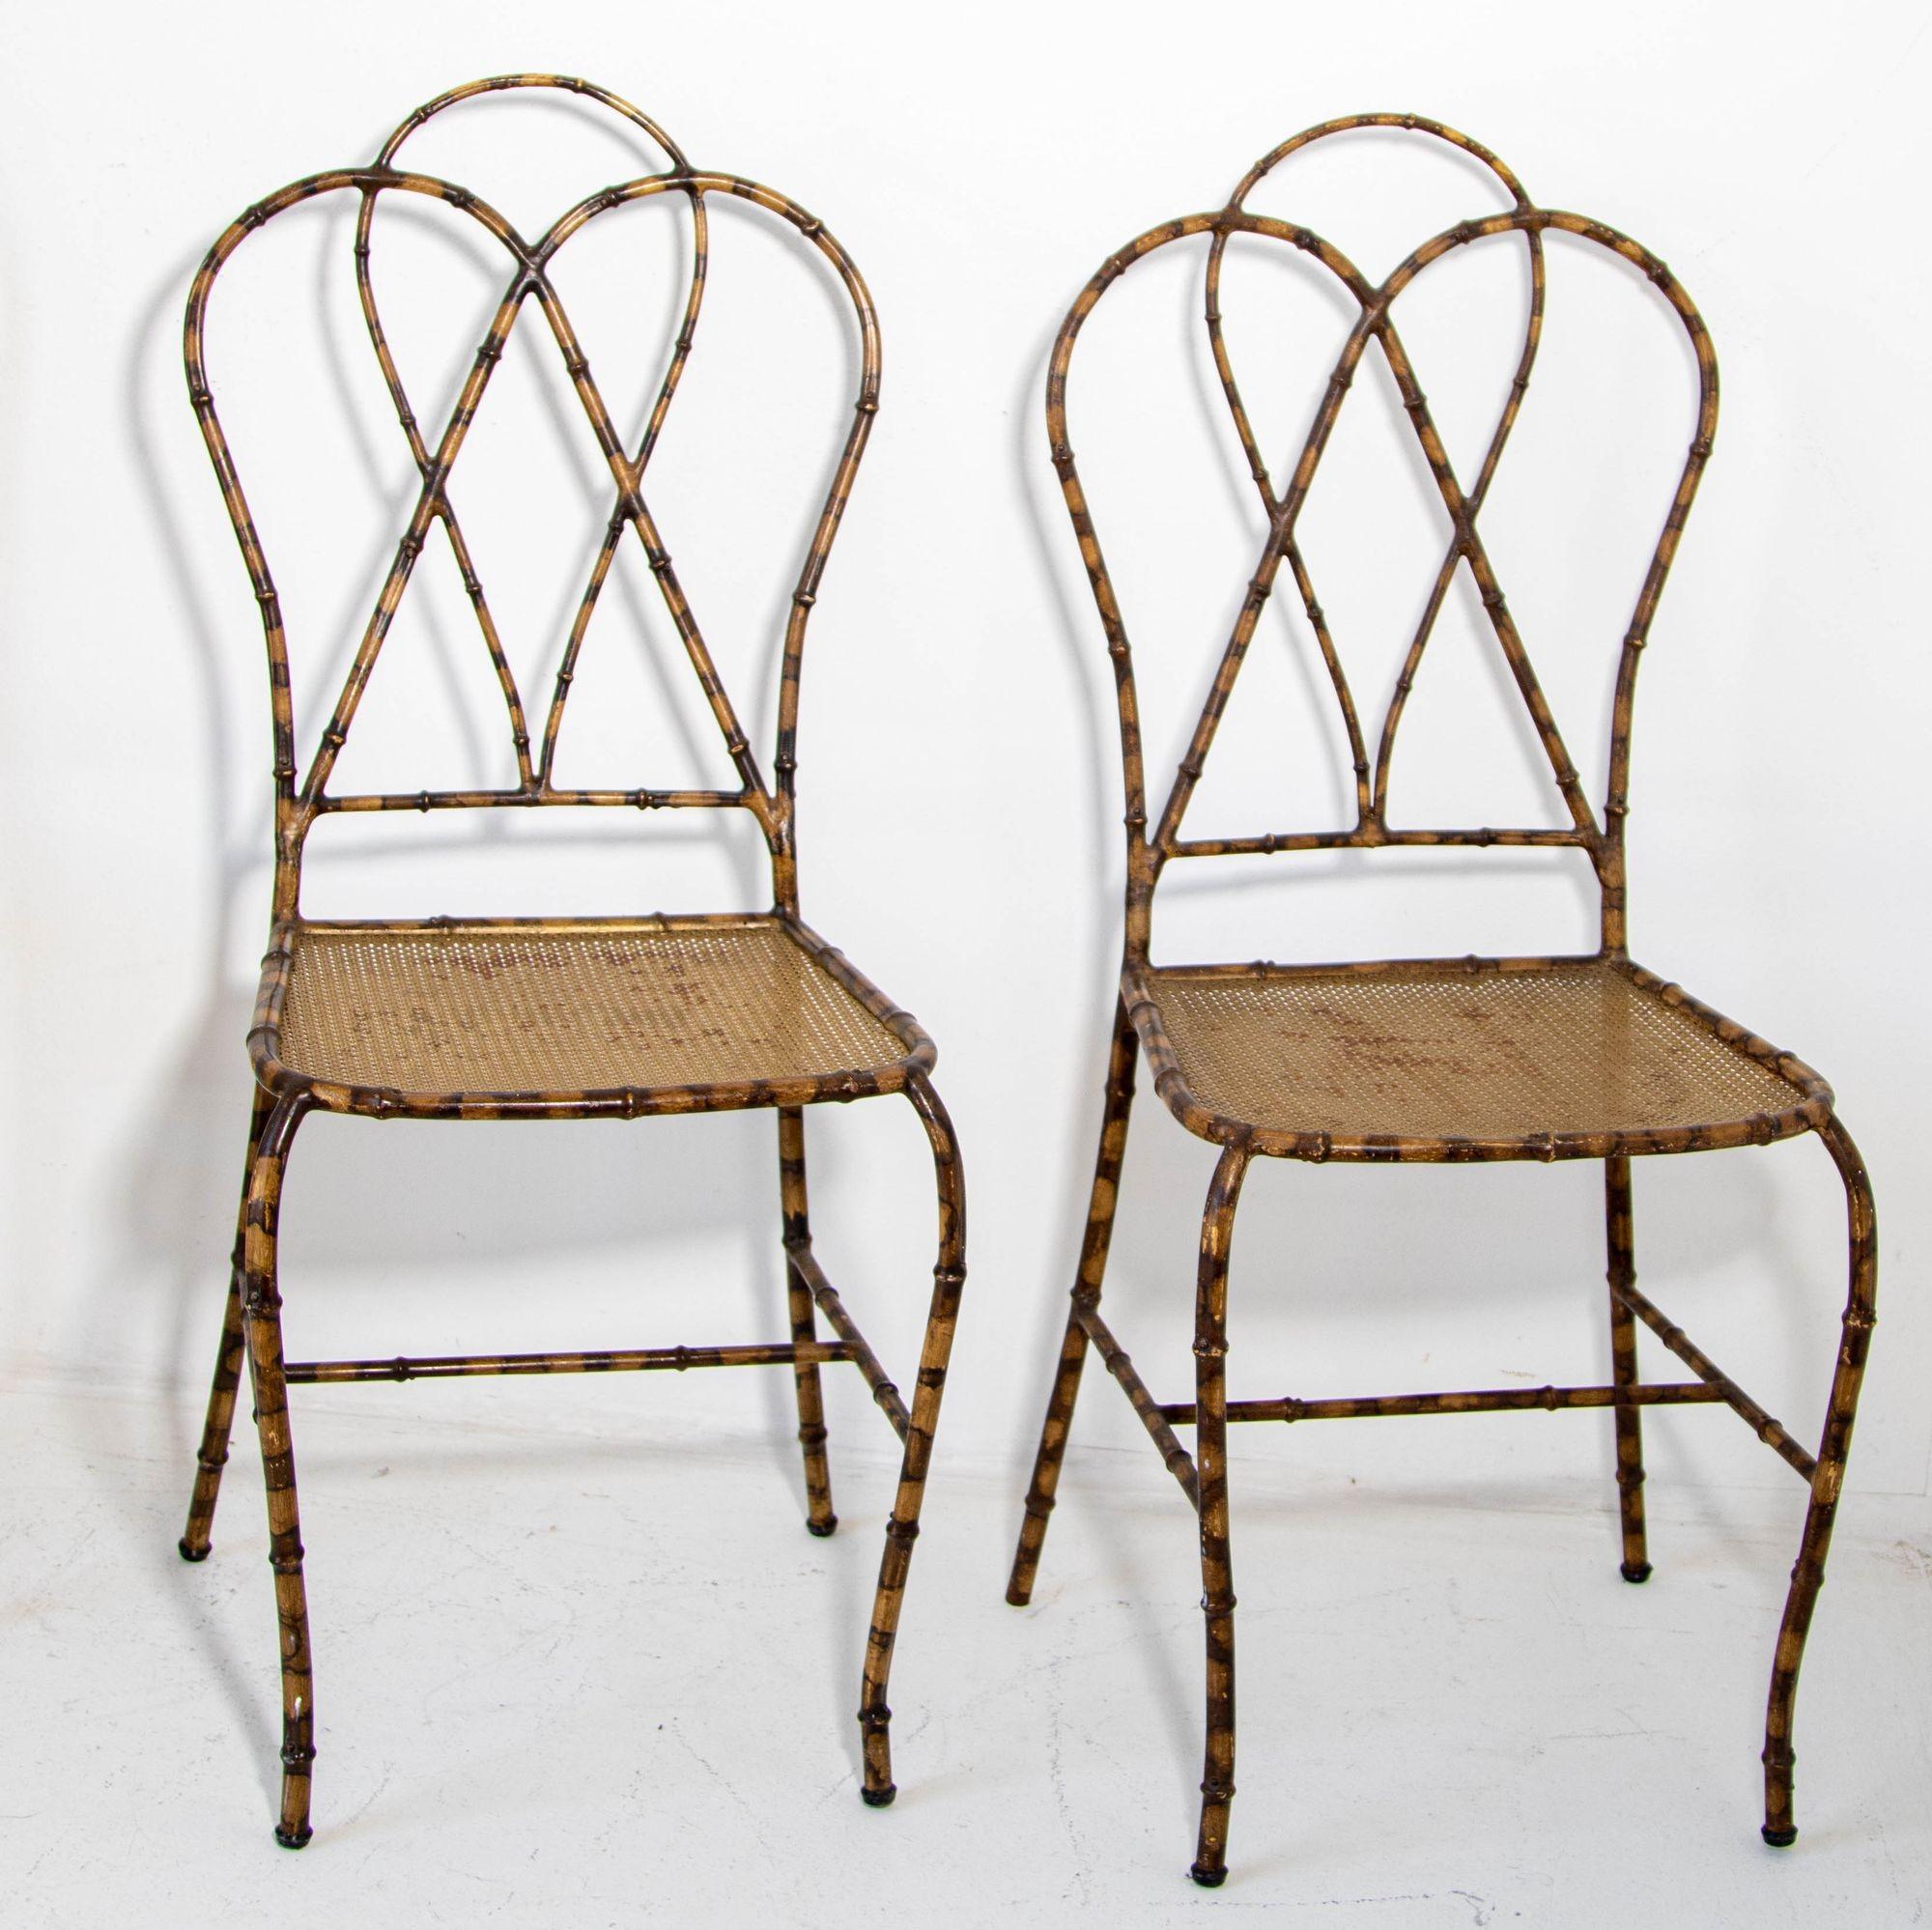 Hollywood Regency Italian Gilt Metal Faux Bamboo Dining Chairs 1950s Set of 4 For Sale